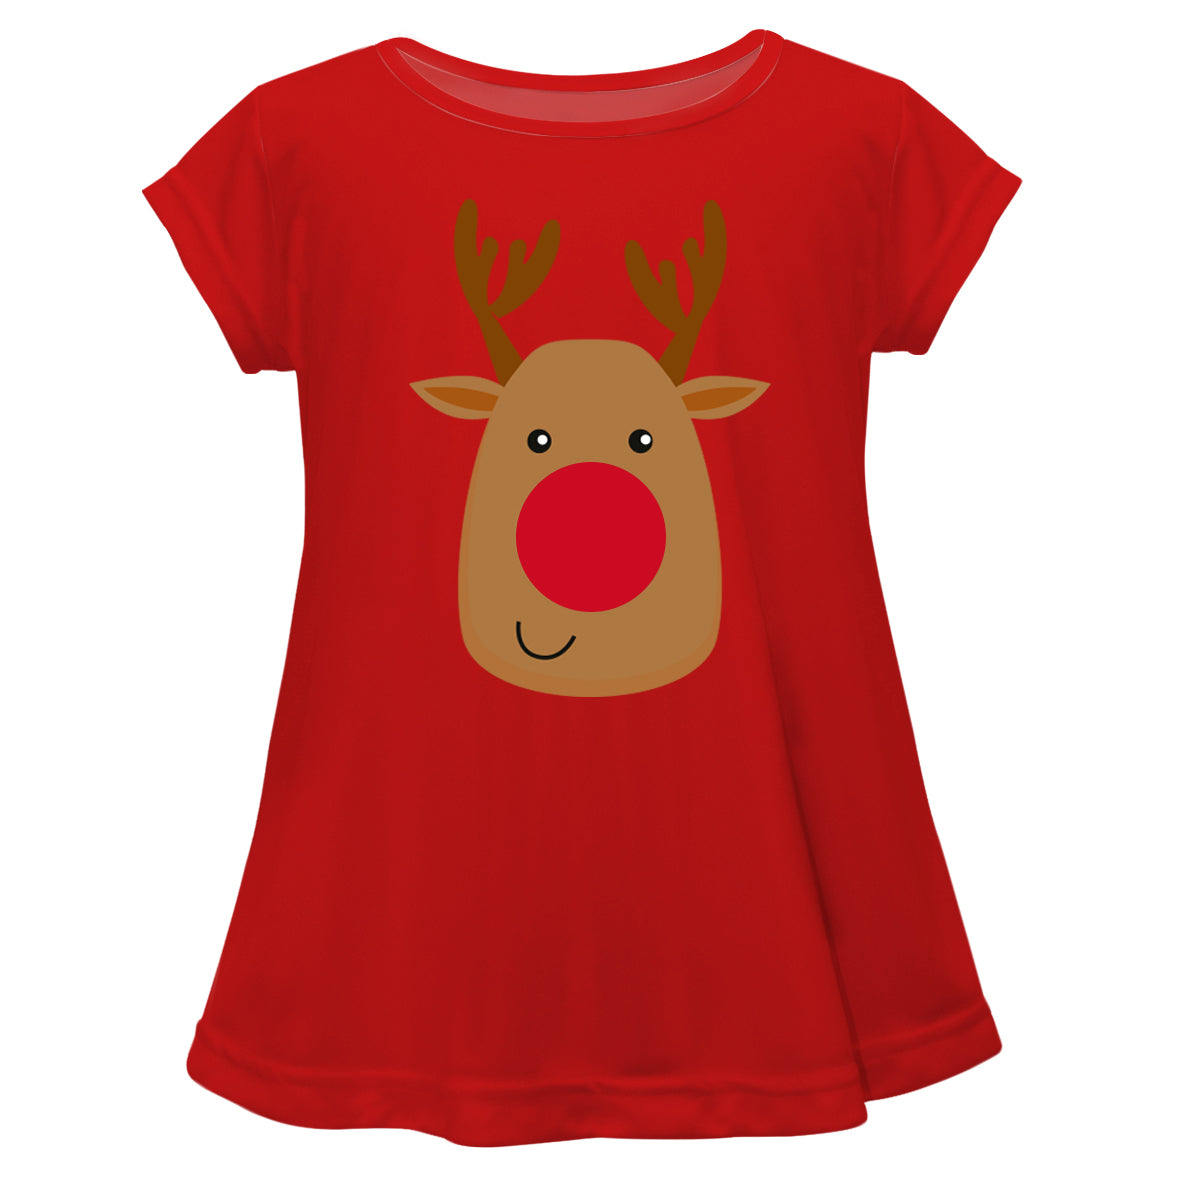 Girls red and brown rudolph blouse with monogram - Wimziy&Co.